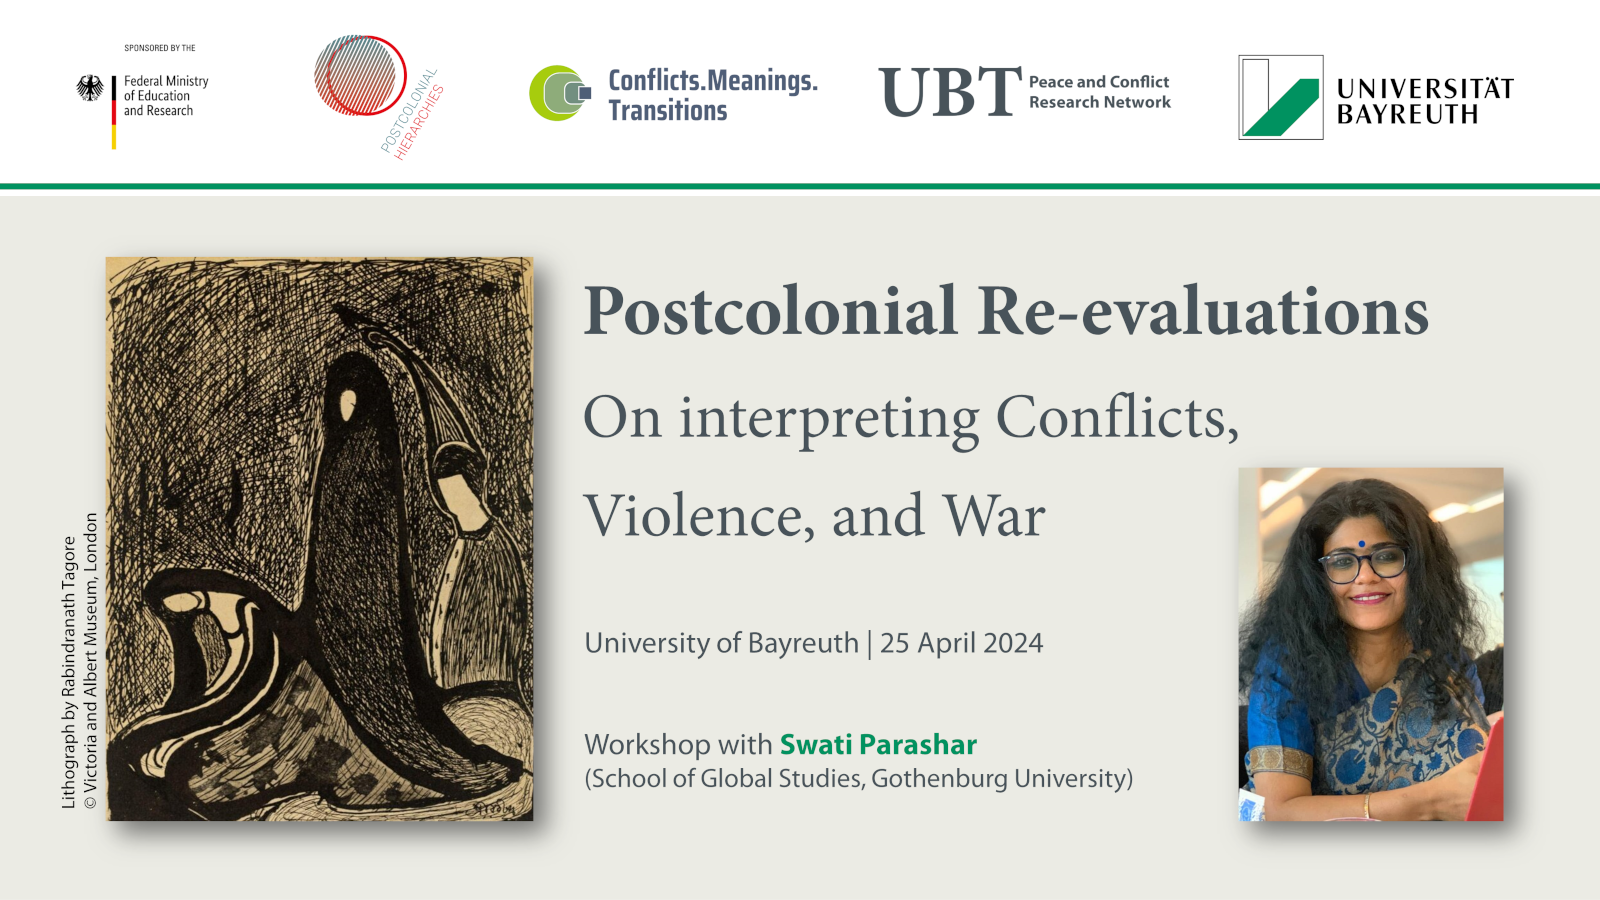 Sharepic - Workshop "Post-colonial re-evaluations"